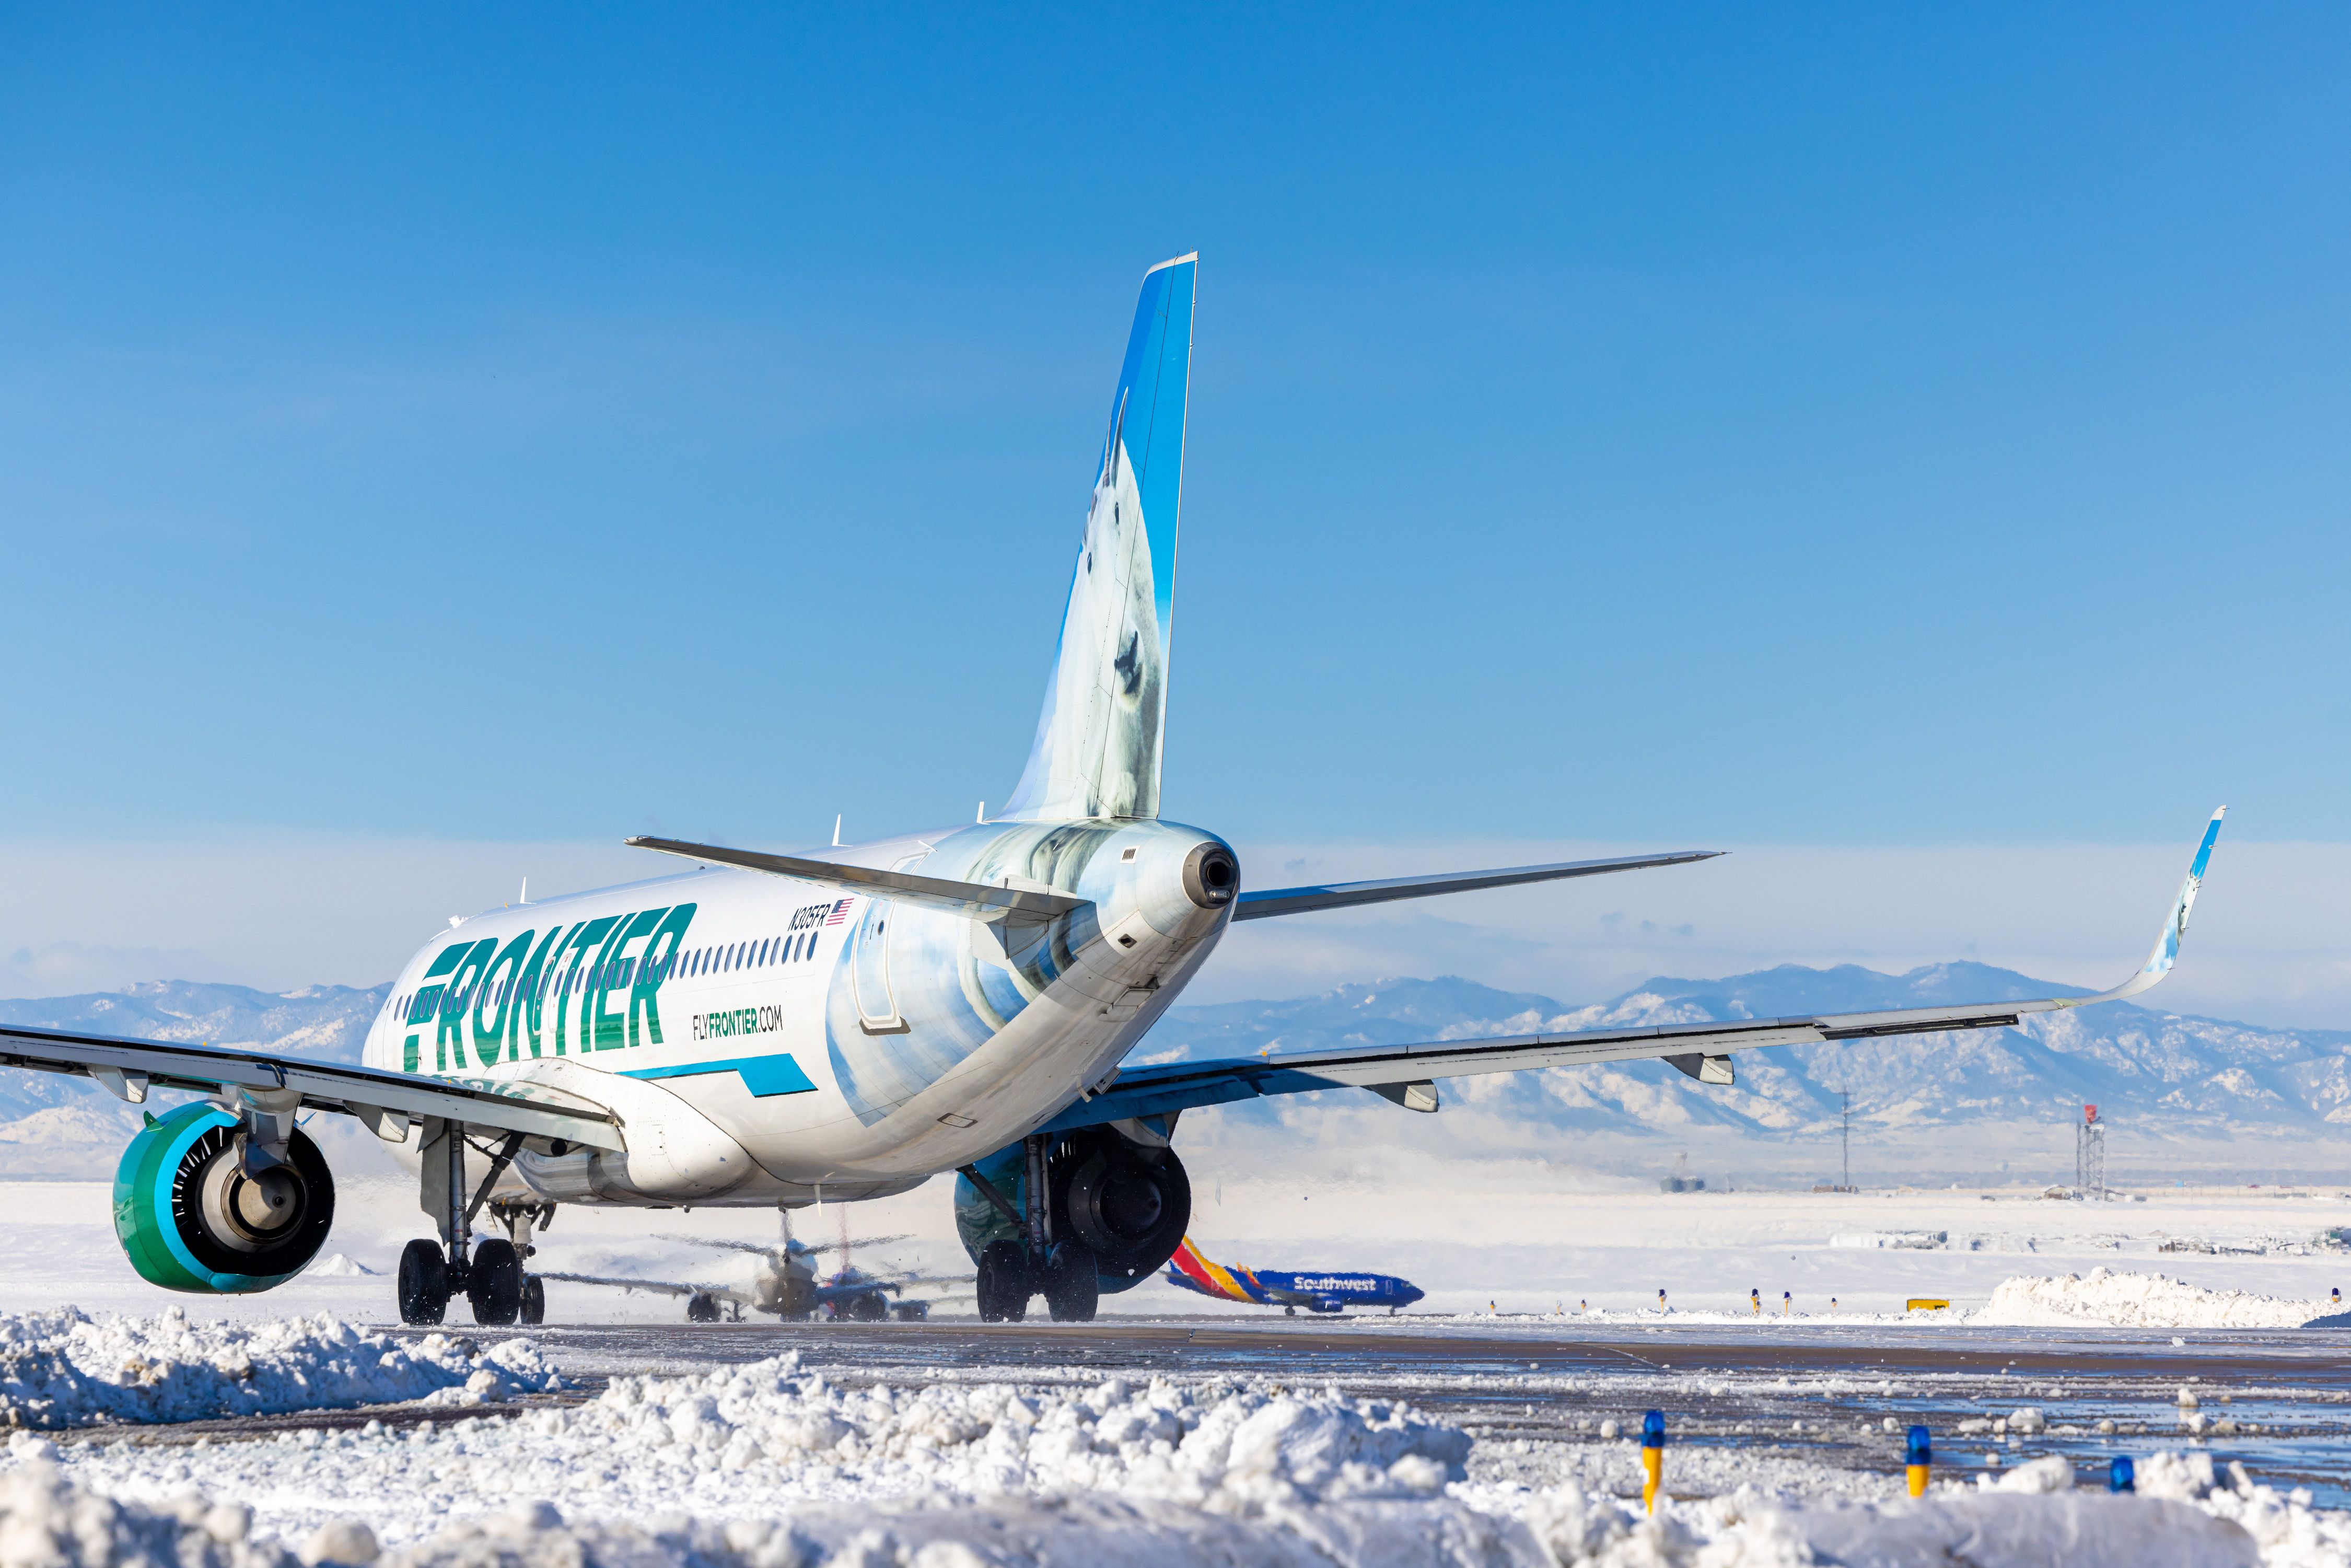 A Frontier Airlines plane on a snowy runway.